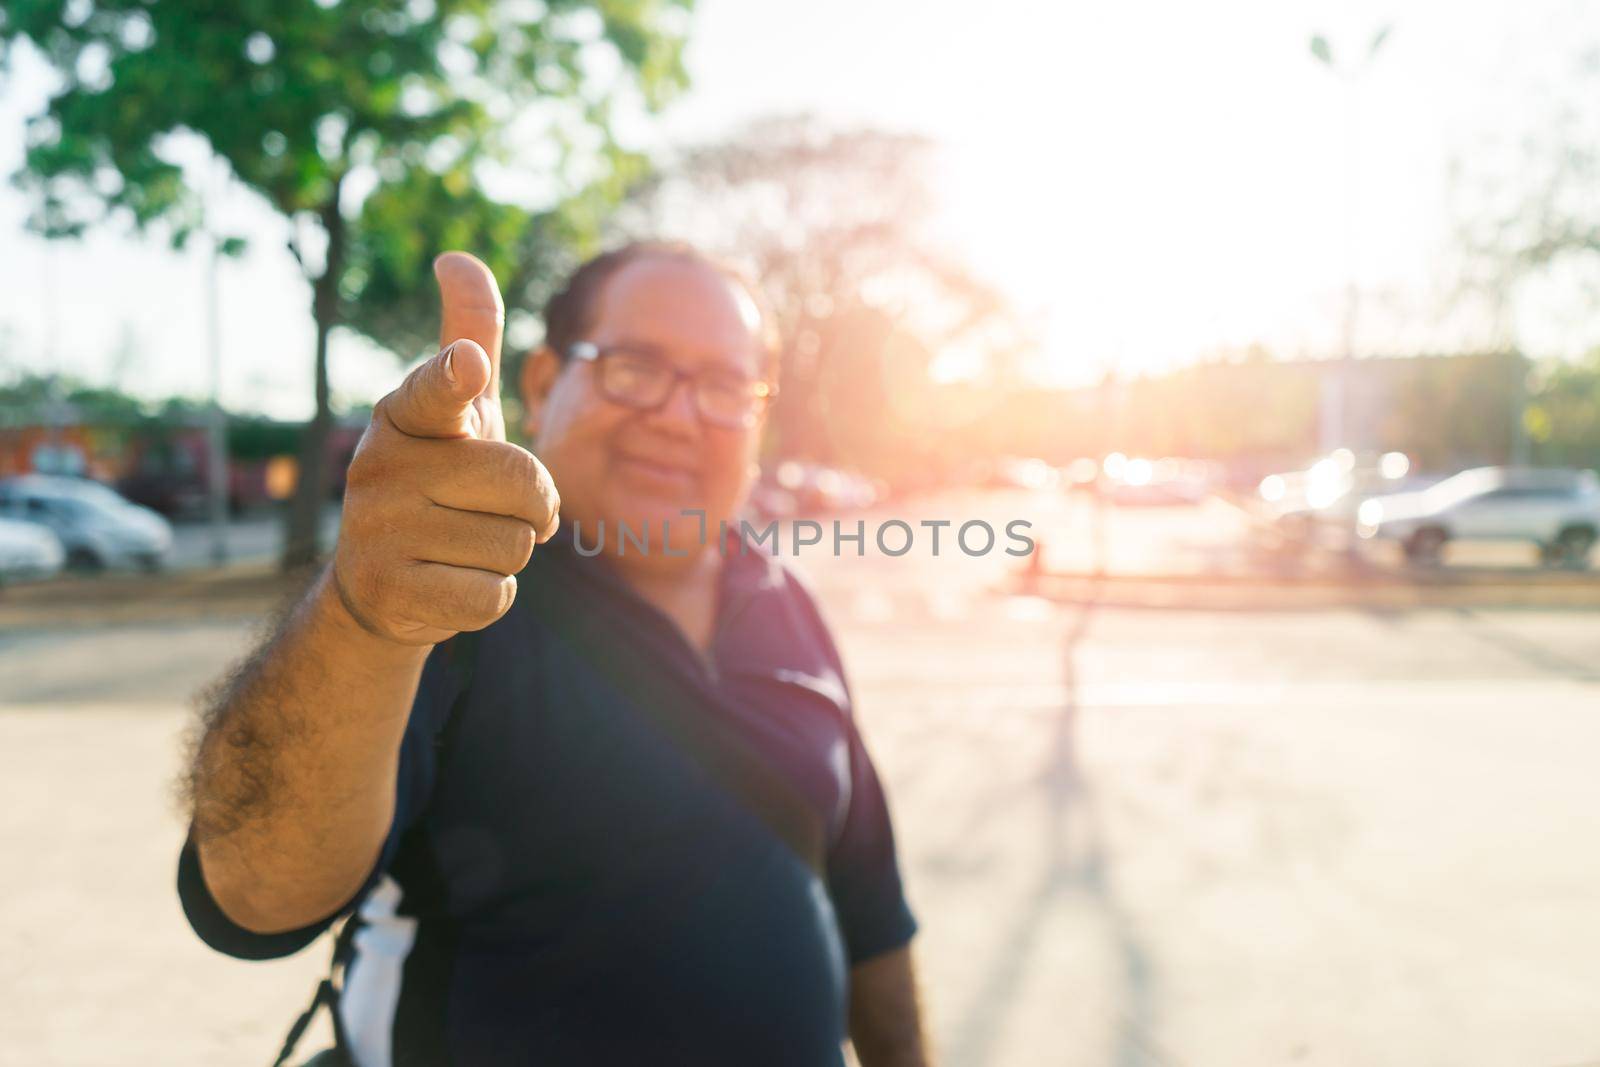 Local tourist mature latin man pointing his finger at camera during sunset in an outdoor park during sunset by cfalvarez